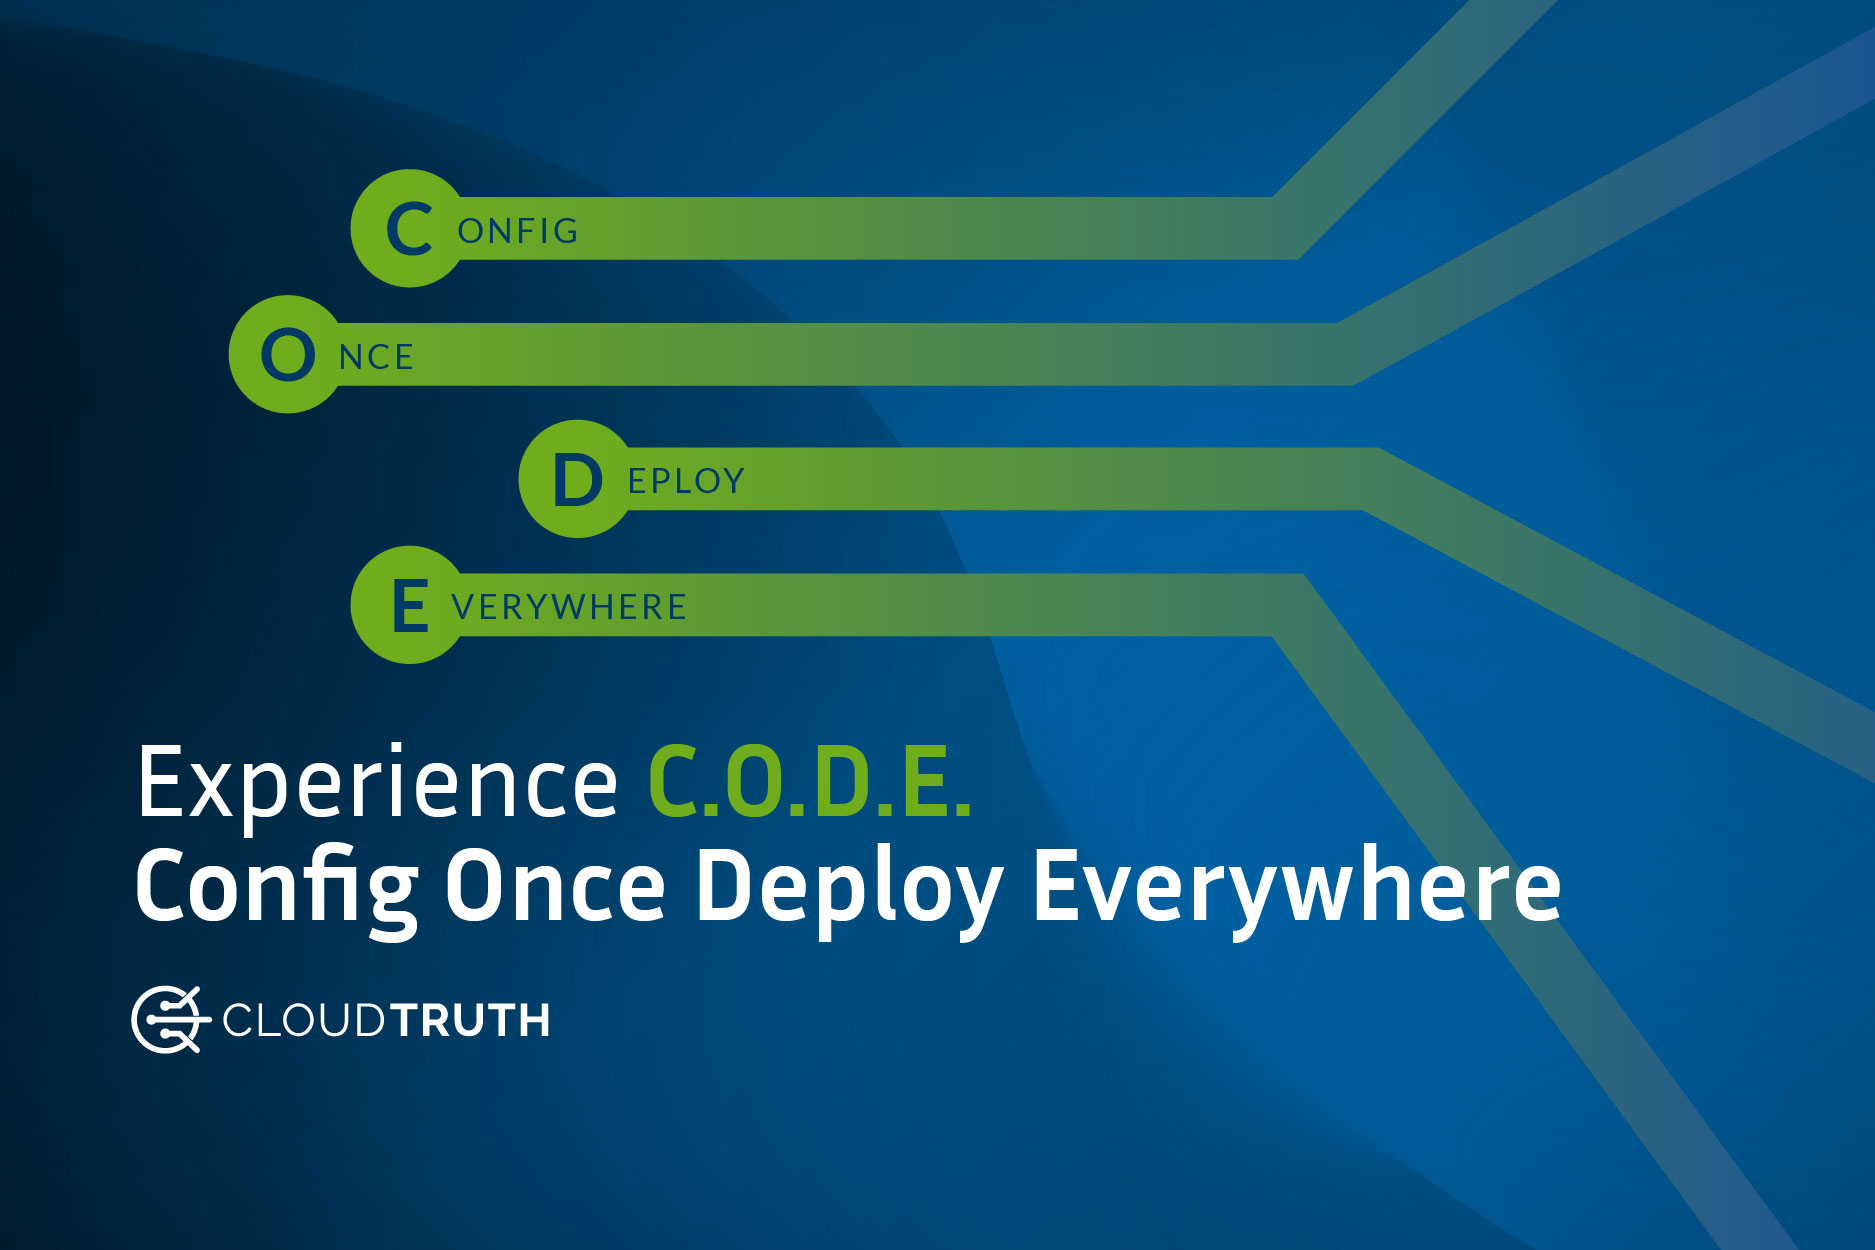 It's Time for Configure Once Deploy Everywhere